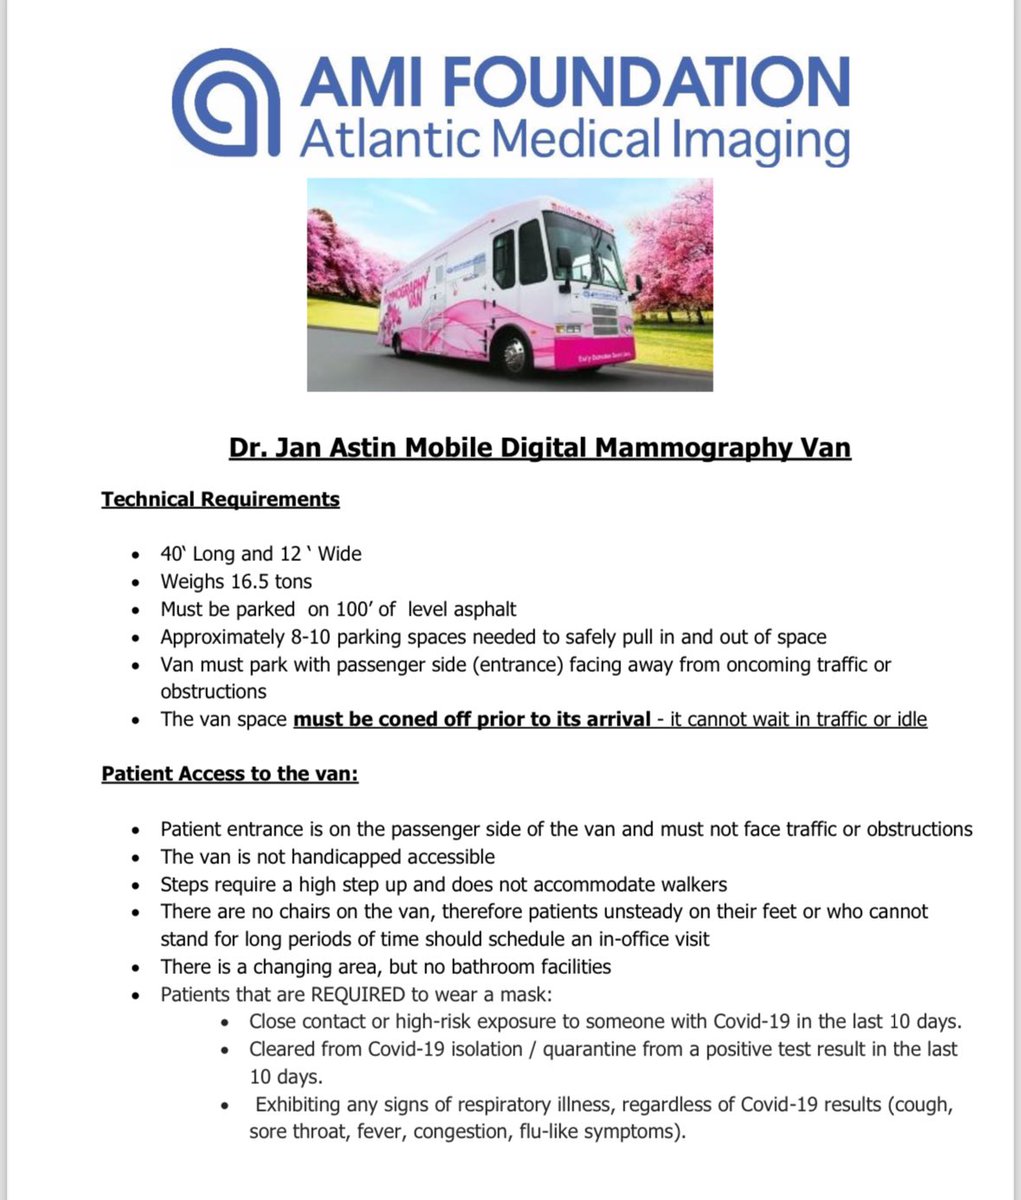 Take time for YOU! A mammogram can give you the gift of a lifetime. 

Come visit the Dr. Jan Astin Mobile Digital Mammography Van on Saturday of Coaches vs cancer!

Mammograms available from 9am-3pm! 

#cvc2024 #crushcancer